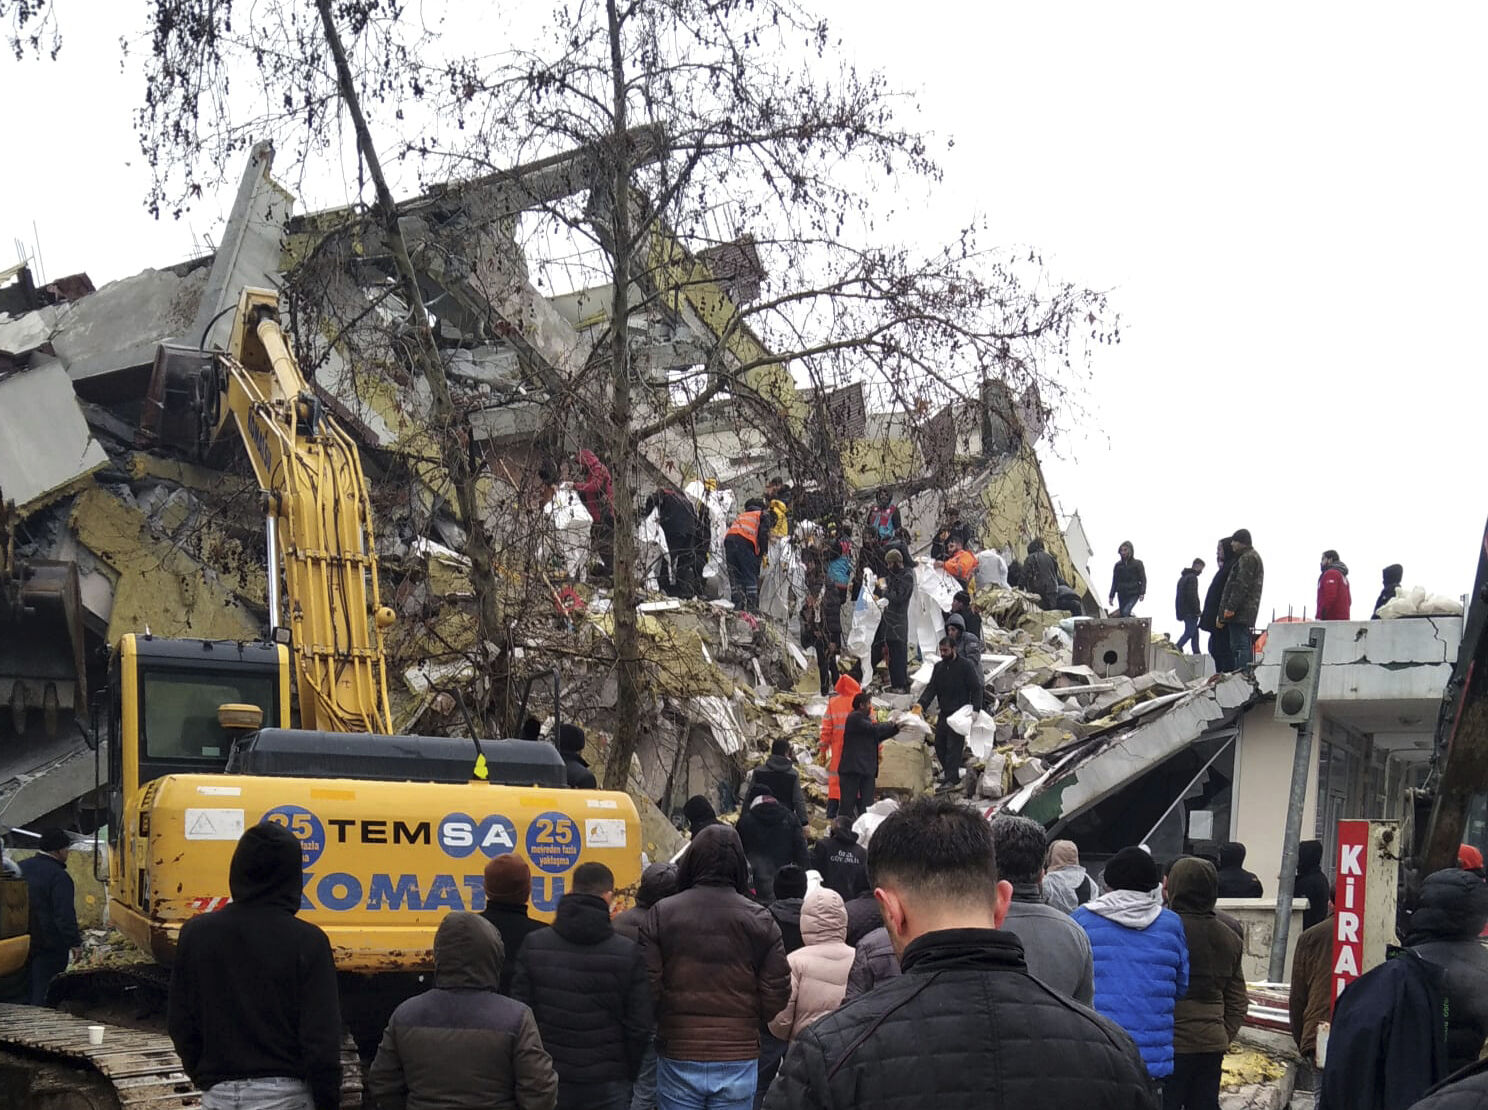 <p>Rescue workers try to reach trapped residents in a collapsed building in Kahta, in Adiyaman province, southeastern Turkey, Monday, Feb. 6, 2023. A powerful earthquake that struck southeast Turkey and northern Syria has killed more than 640 people with hundreds injured. The toll is expected to rise as rescuers search for dead and survivors in dozens of collapsed buildings across the region. (AP Photo)</p>   PHOTO CREDIT: AP photo